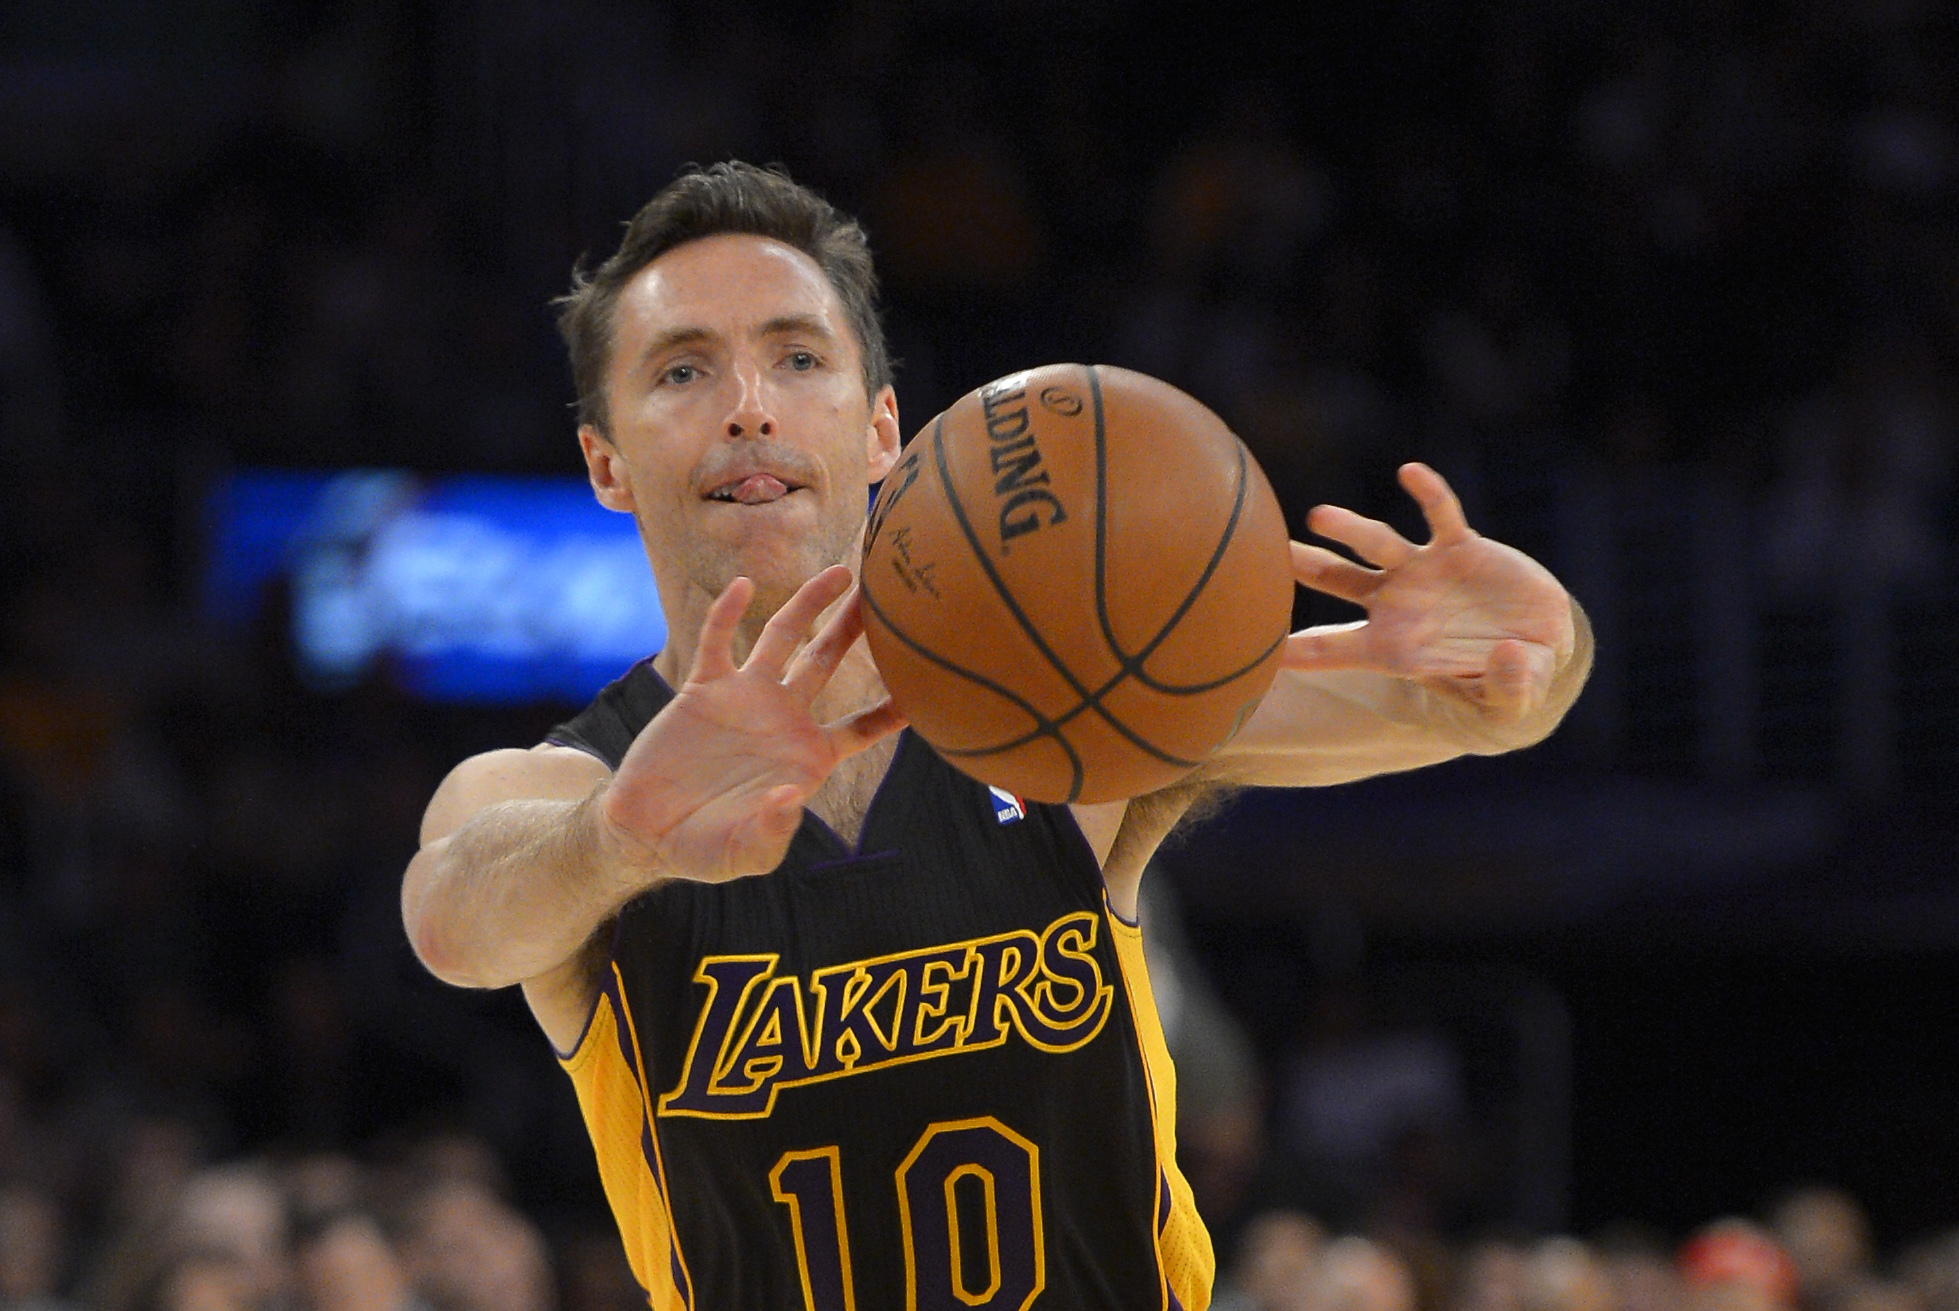 Steve Nash searches for better encore for Hall of Fame career